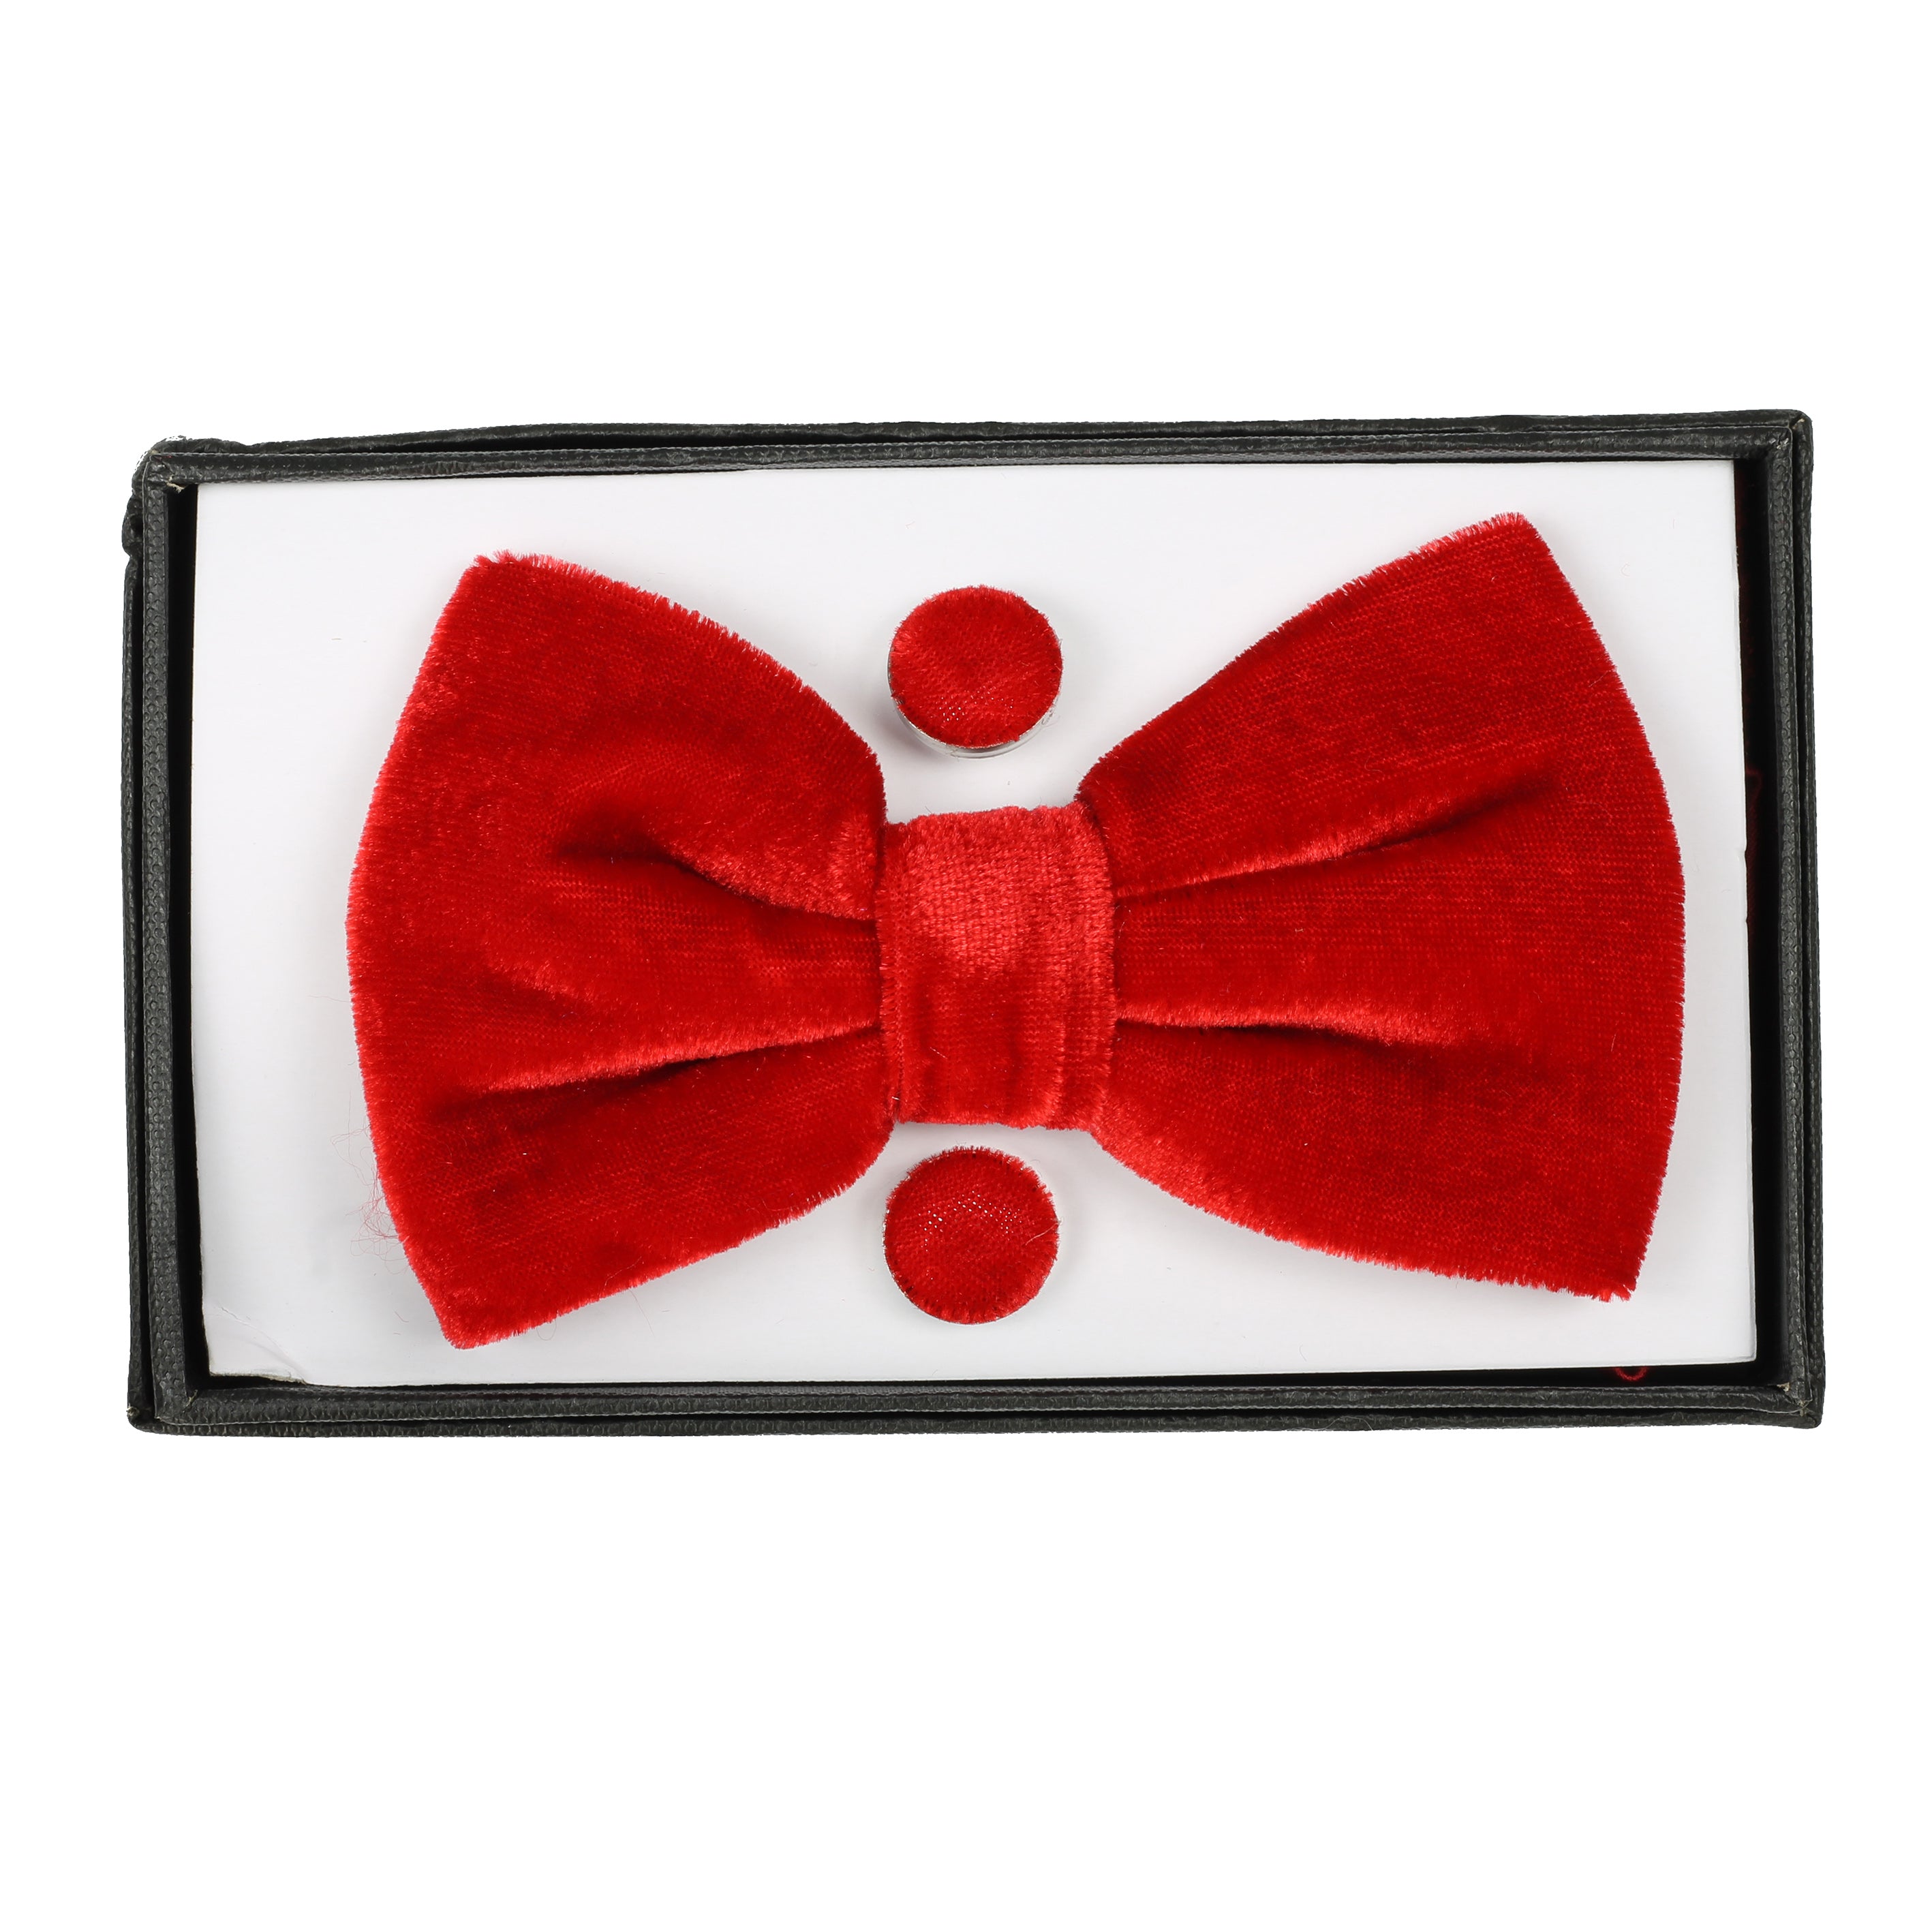 Red Shiny Velvet Bow Tie With Cufflink Pocket Square